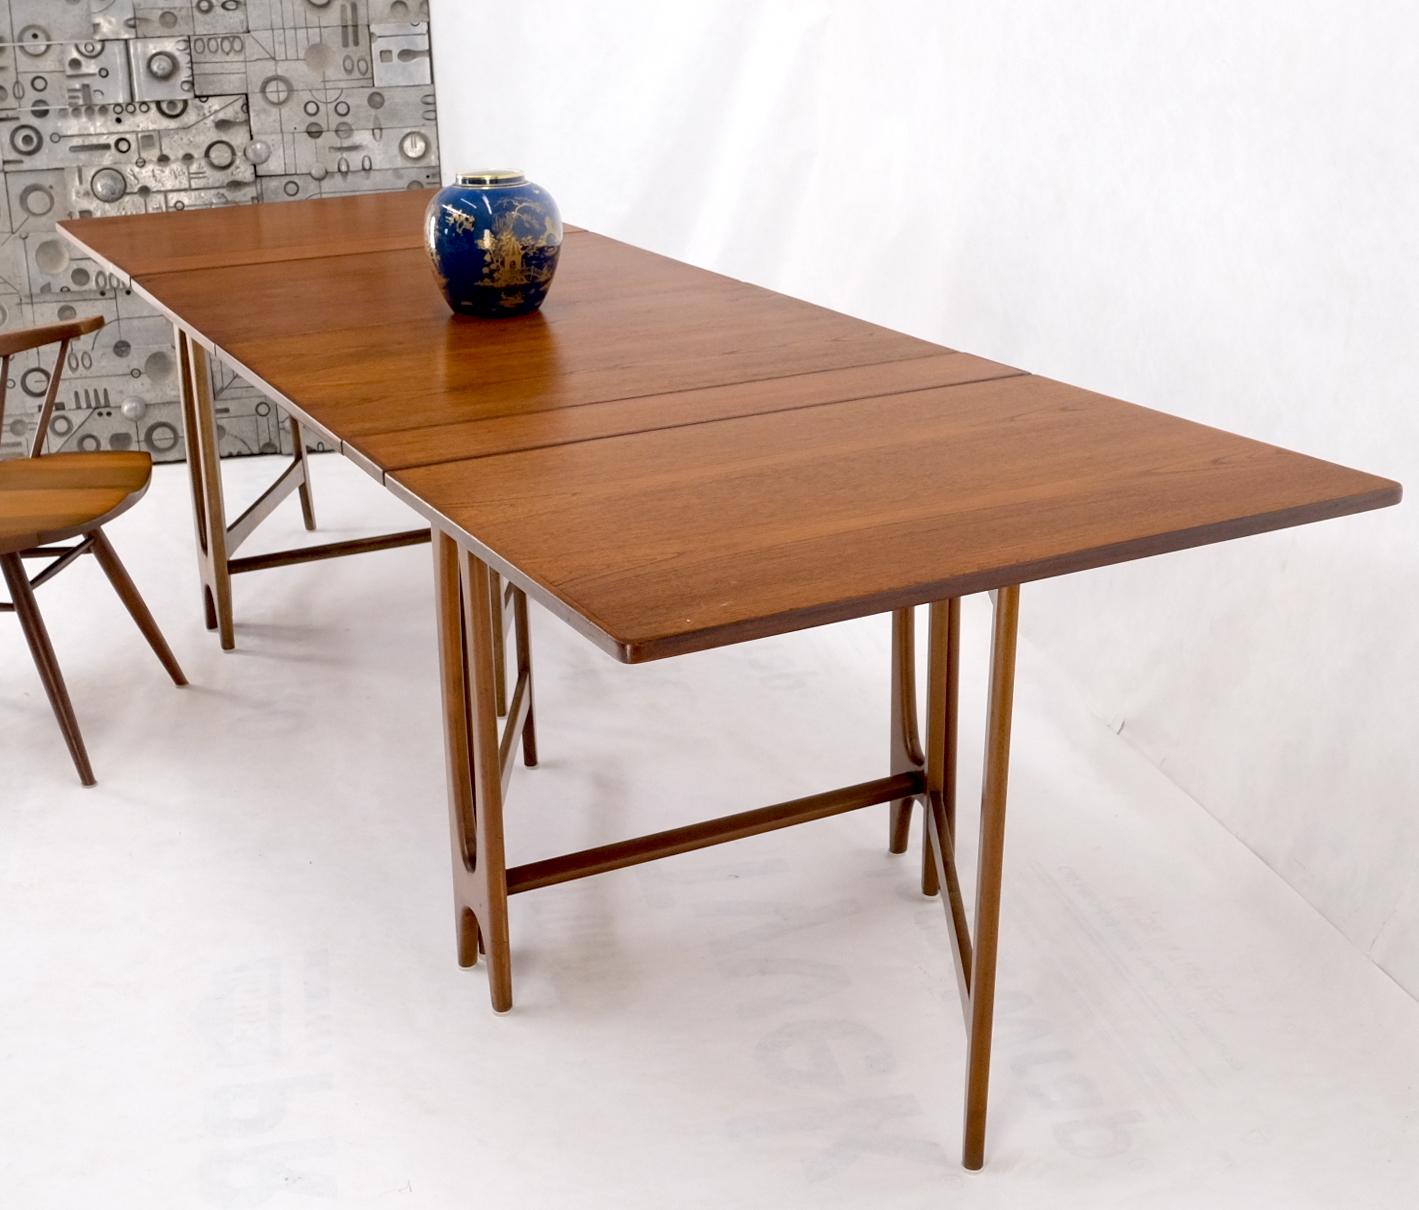 Teak Danish Mid-Century Modern Banquet dining gate leg drop Leaf Maria Table 2pcs MINT!
This is a two separate pieces version that can be interconnected into one long table.
Folded dimensions: 35×16×29.